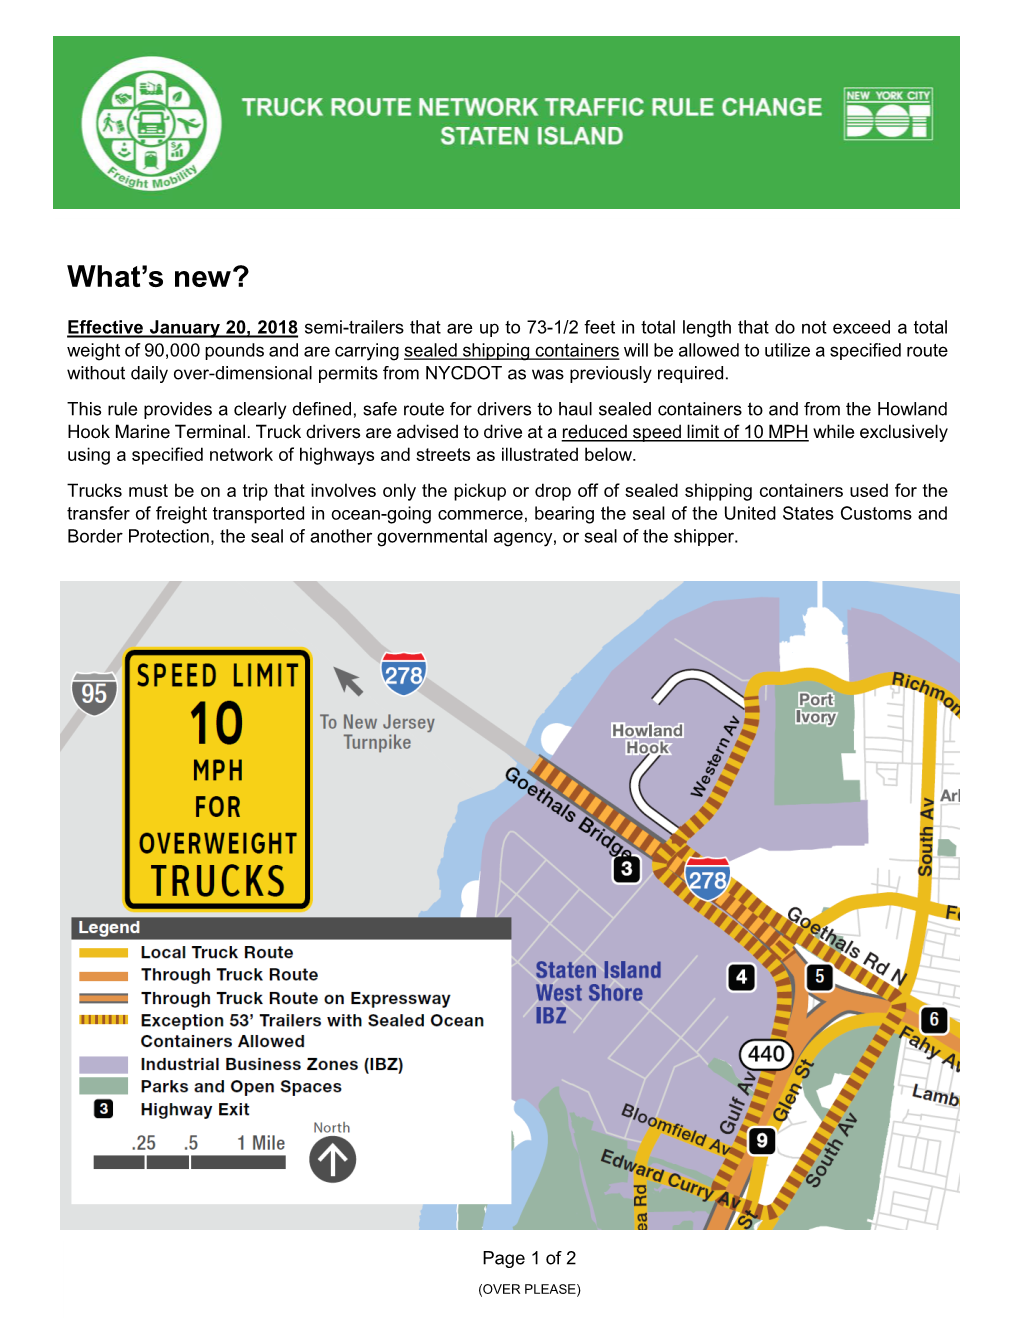 Details on Truck Route Changes in Staten Island